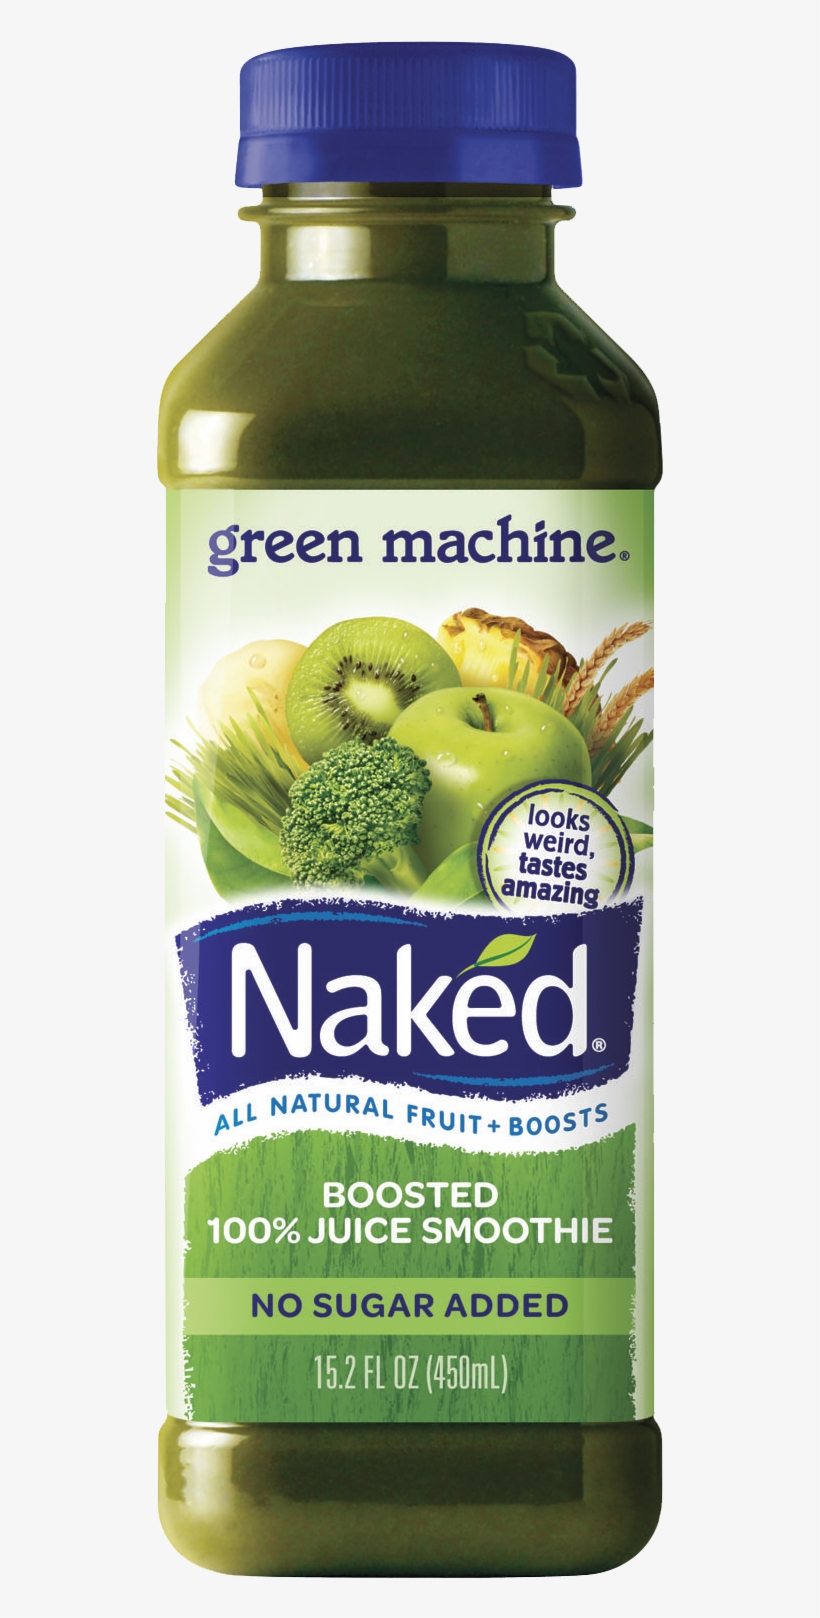 Nkd 15oz Greenmachine - Naked Boosted Smoothie, transparent png #4058330